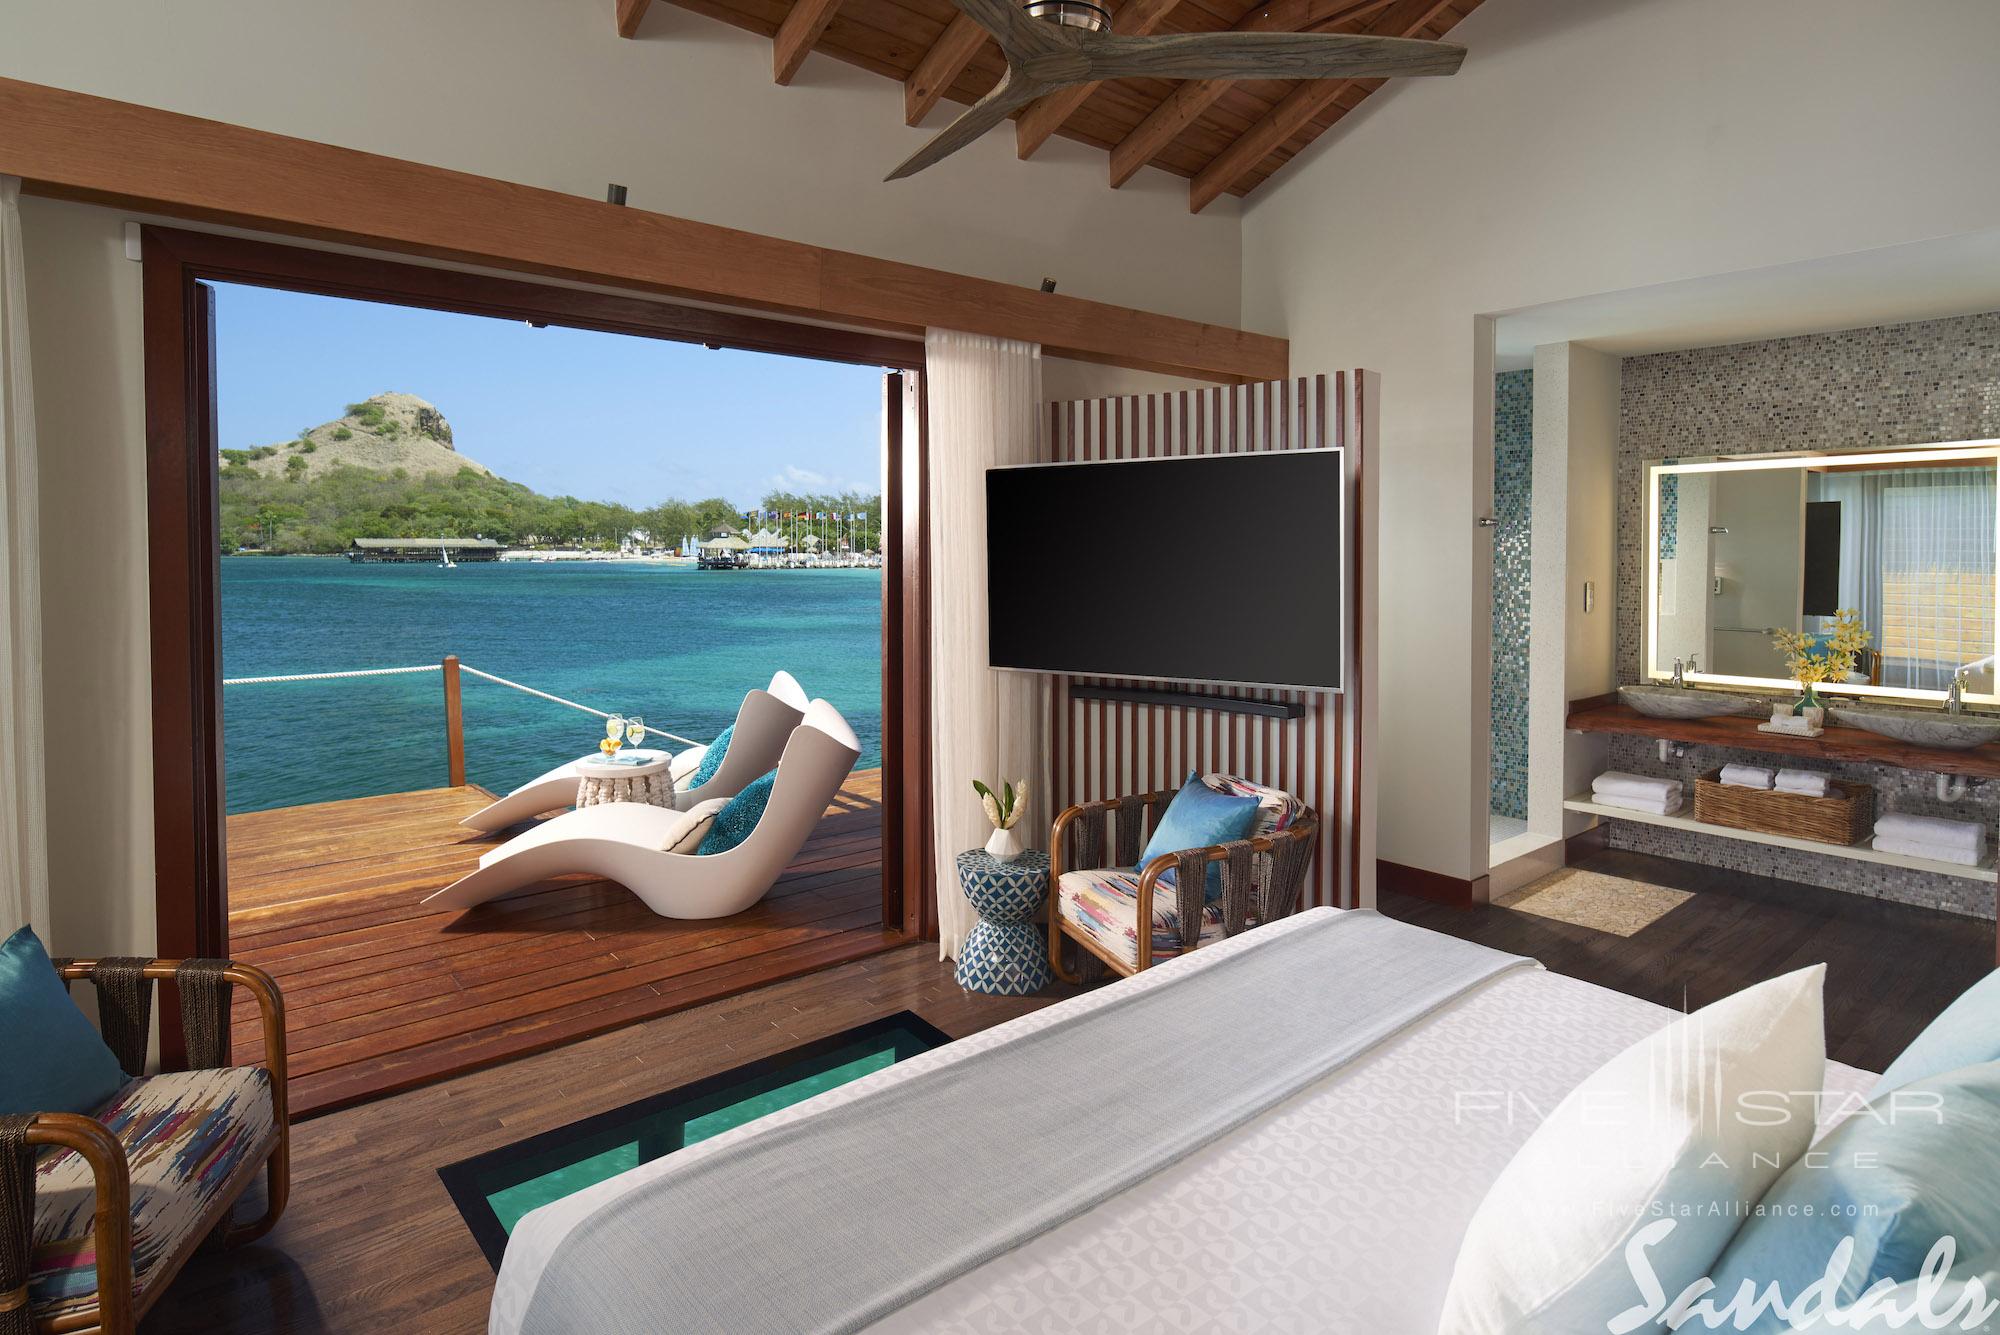 Over-The-Water Bungalow at Sandals Grande St. Lucian